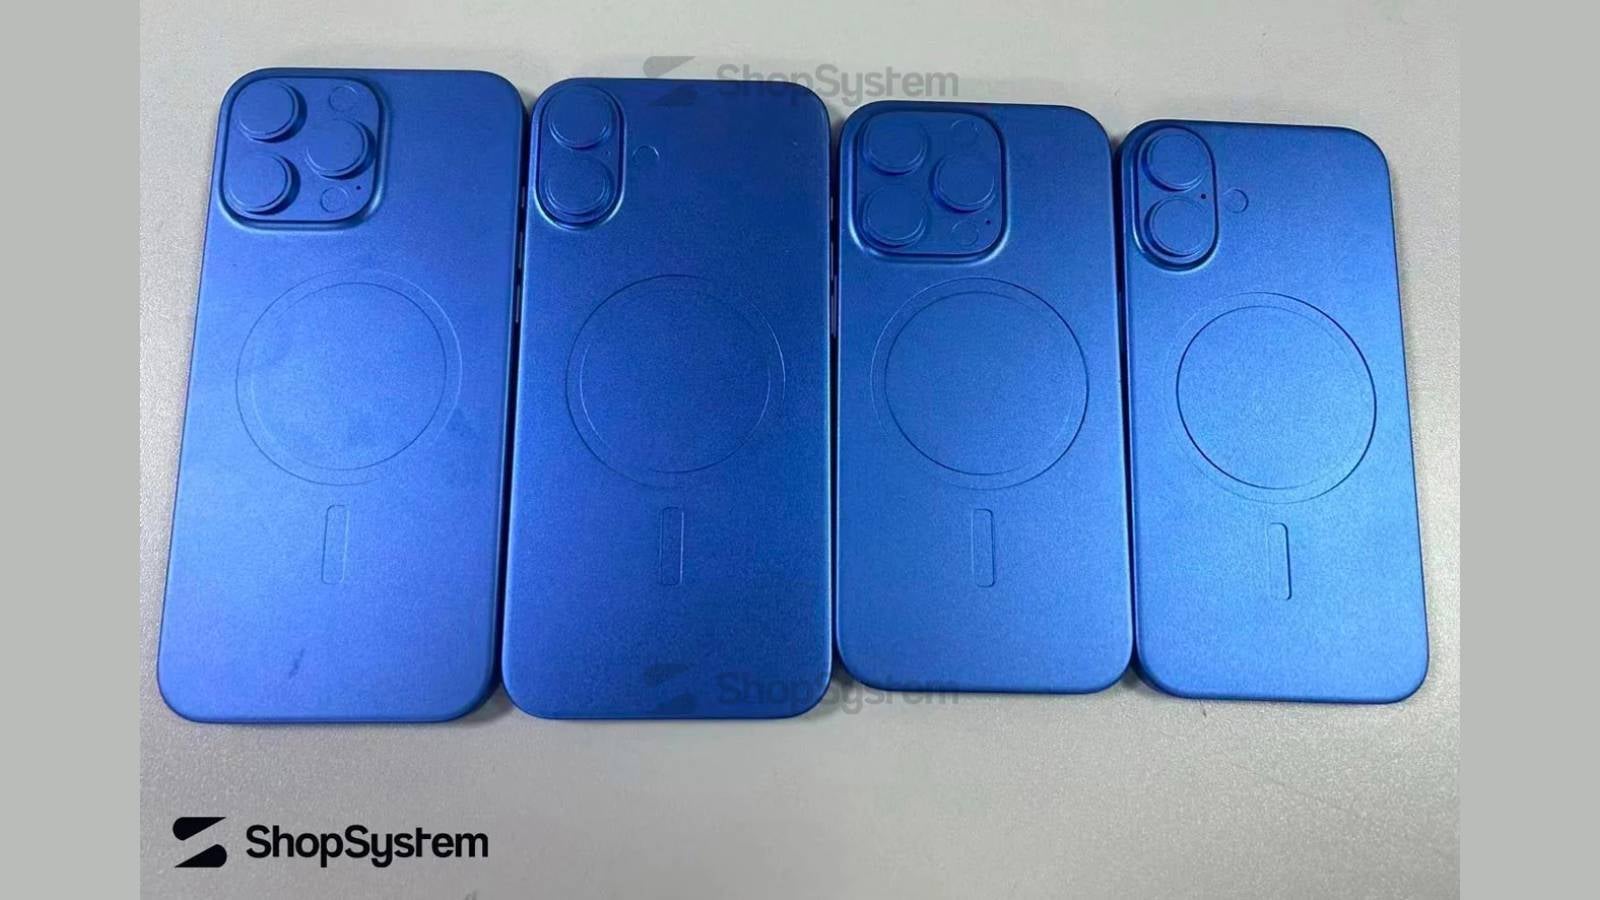 Leaked iPhone 16 vs iPhone 15 image reveals another thing that has changed between the models